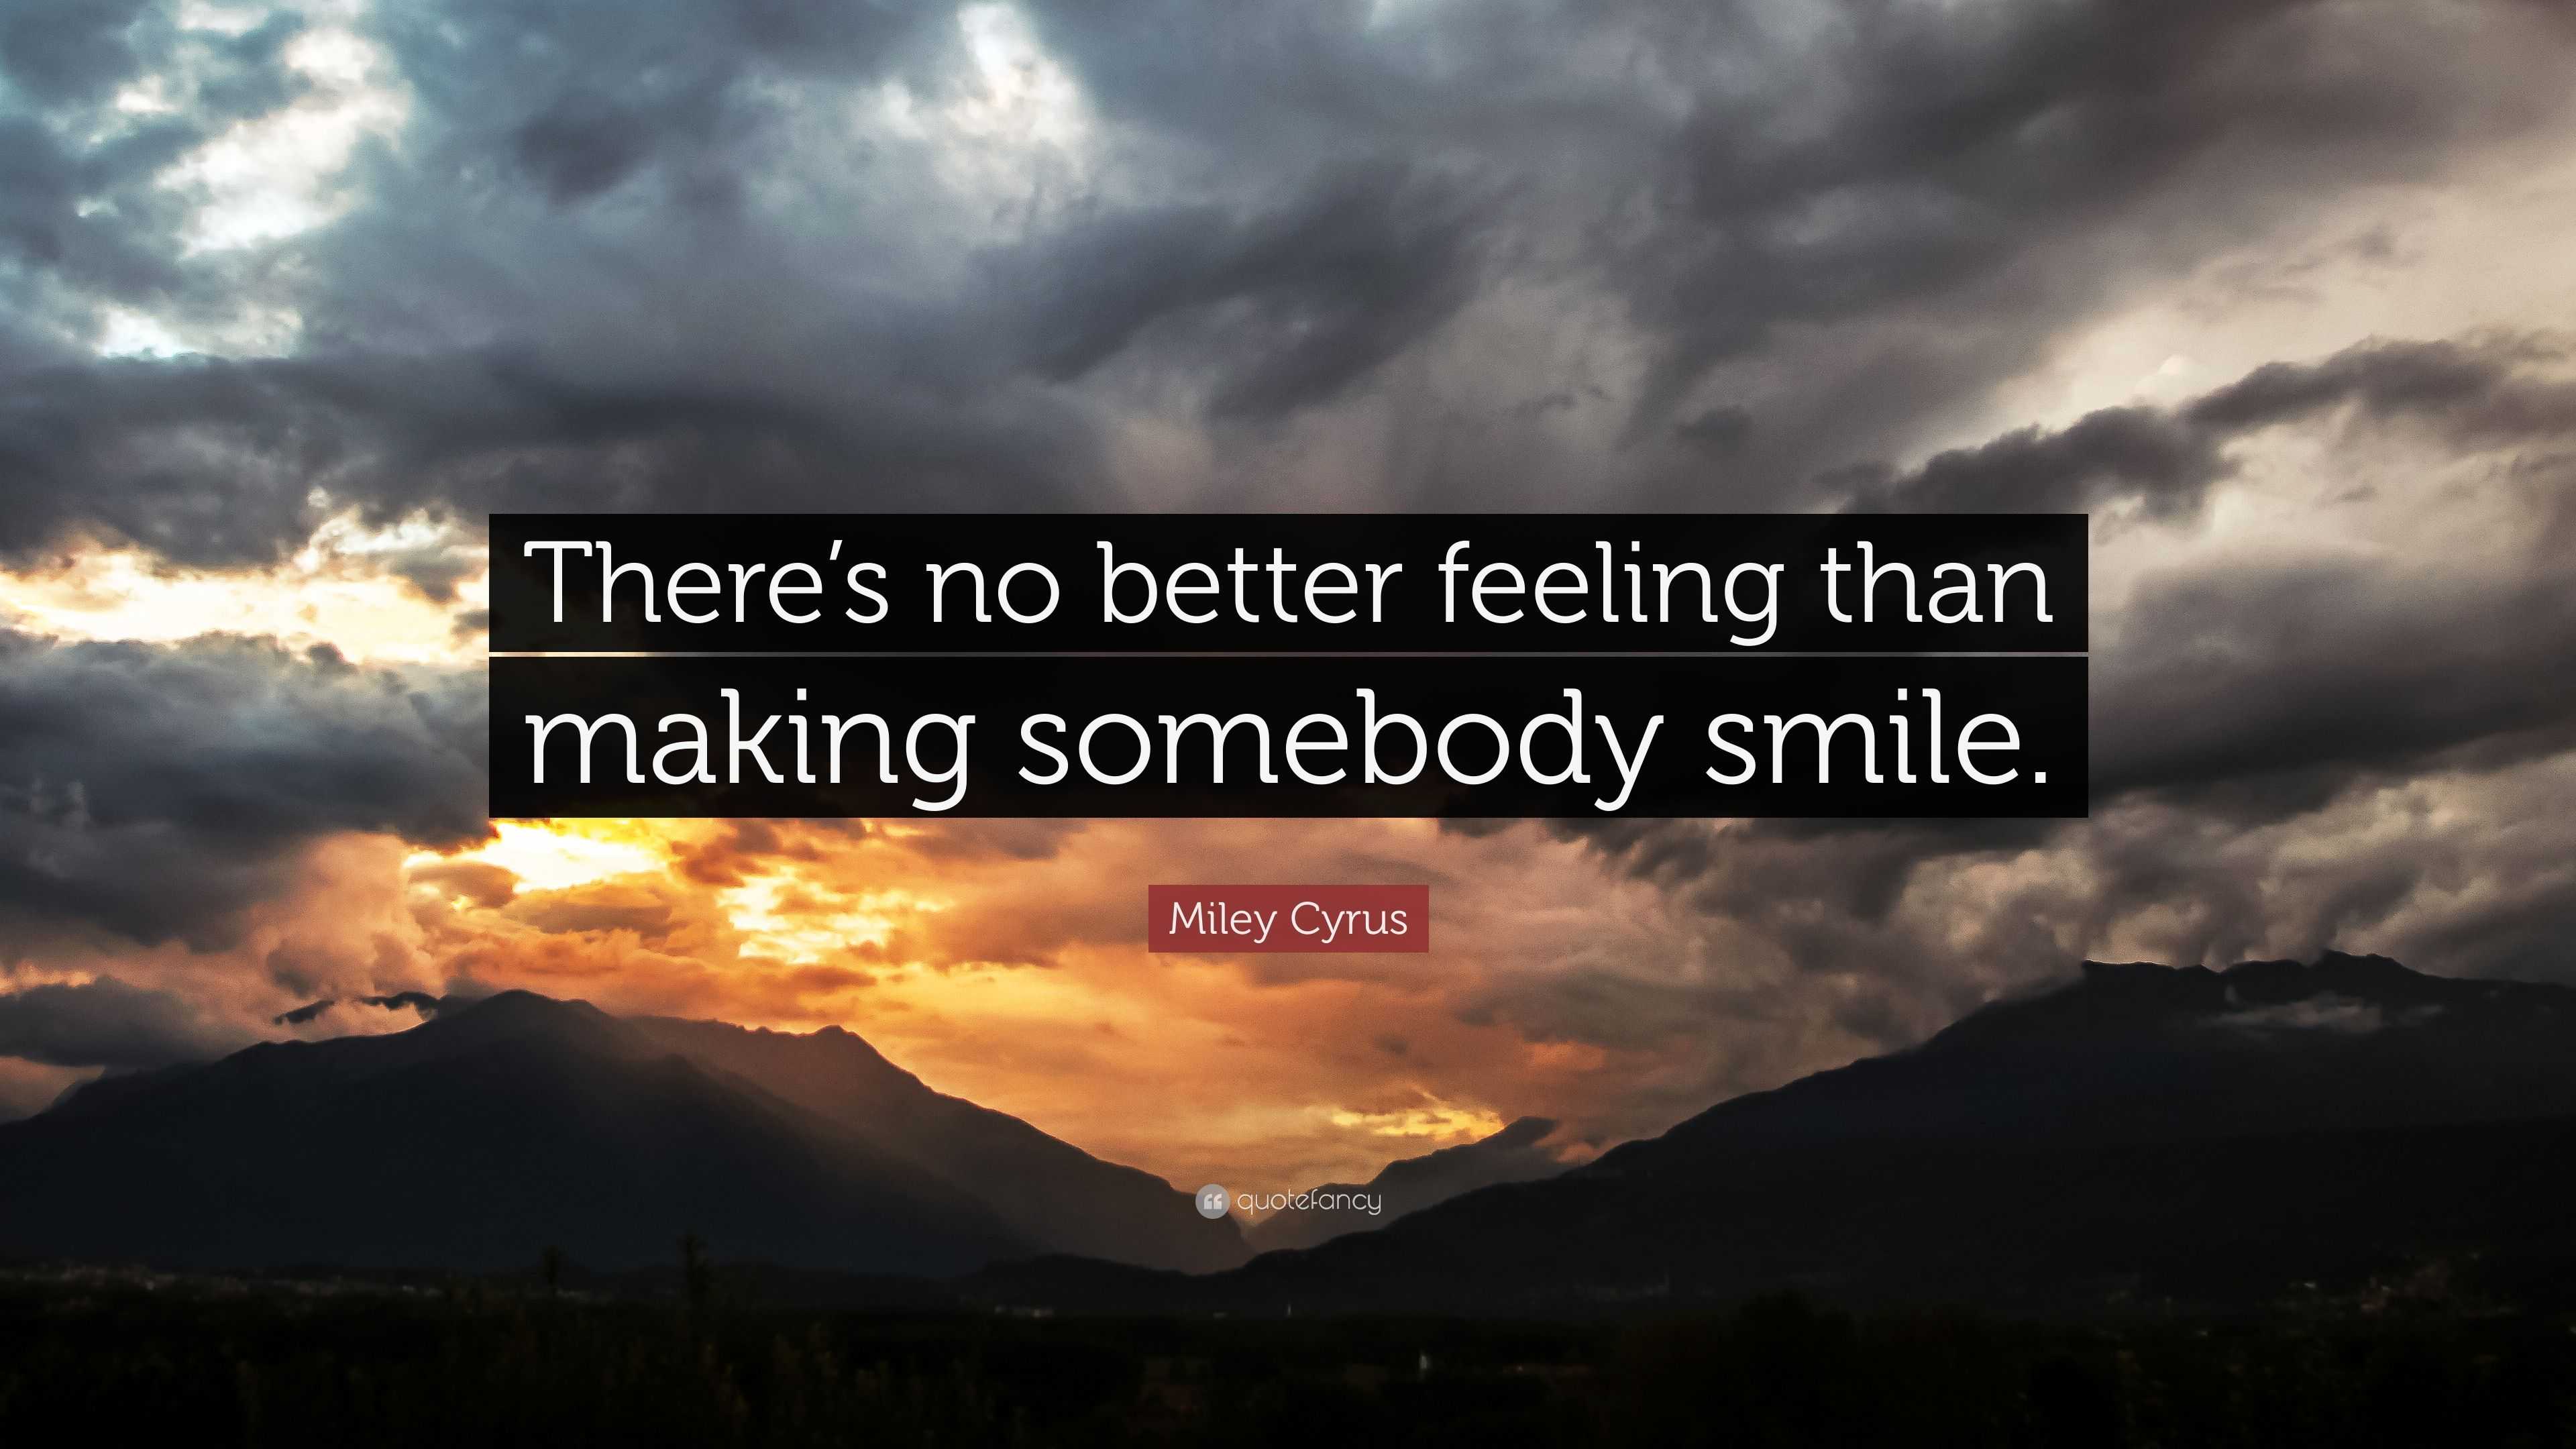 Miley Cyrus Quote: “There's no better feeling than making somebody smile.”